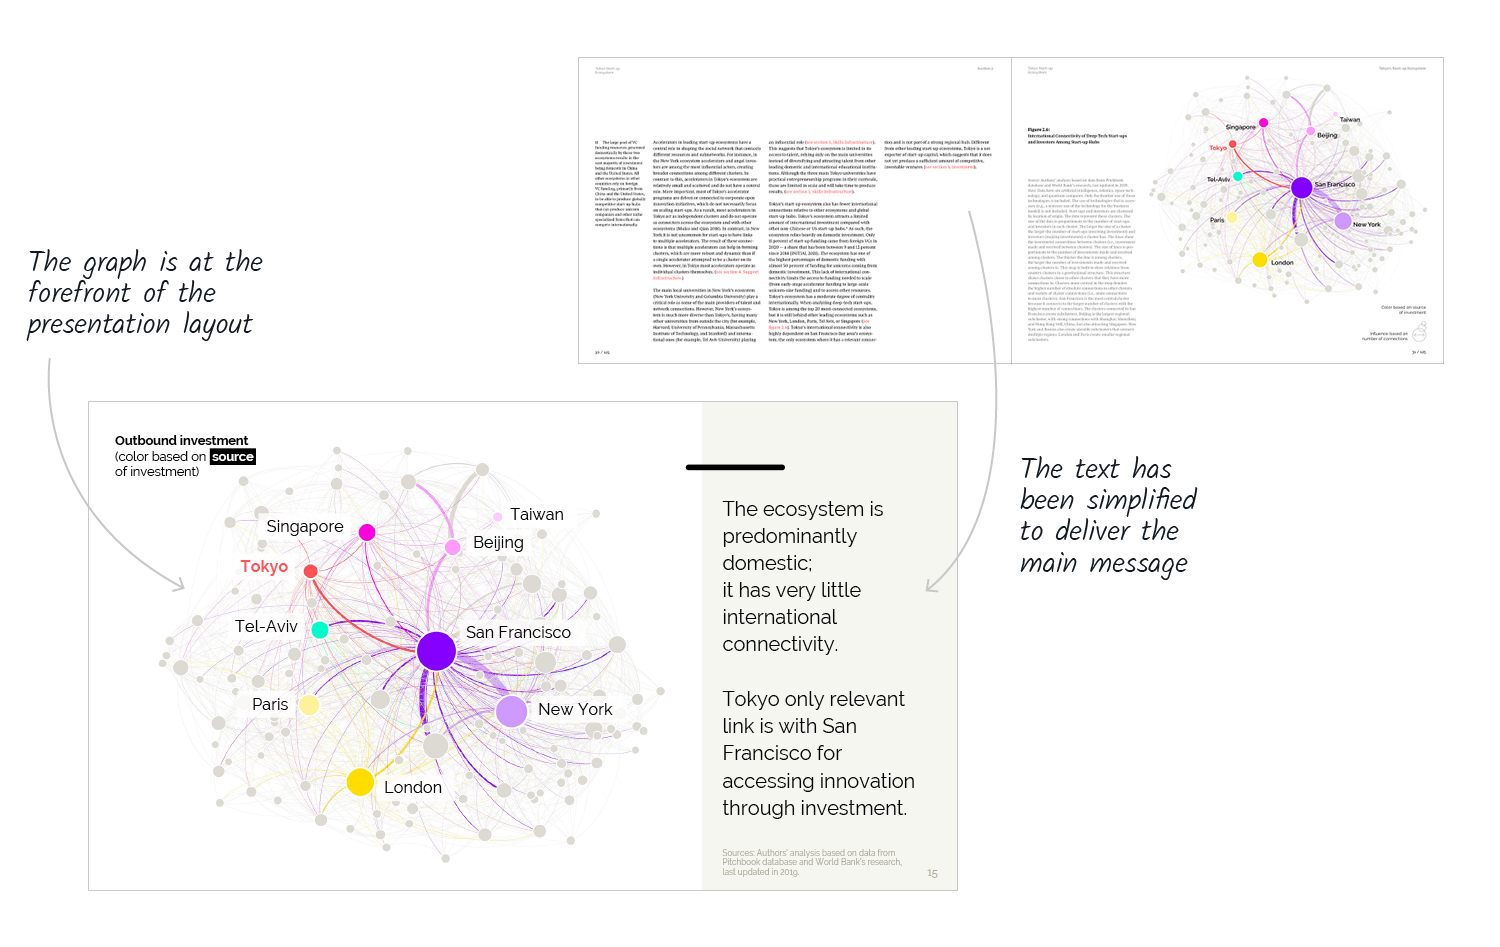 Two different layouts of the same information are presented here. The first shows a double-page spread from the report with text on the left page and the presentation of a network graph on the right page. The second layout, adapted for an electronic presentation. shows the same graph enlarged, accompanied by a short explanatory text.